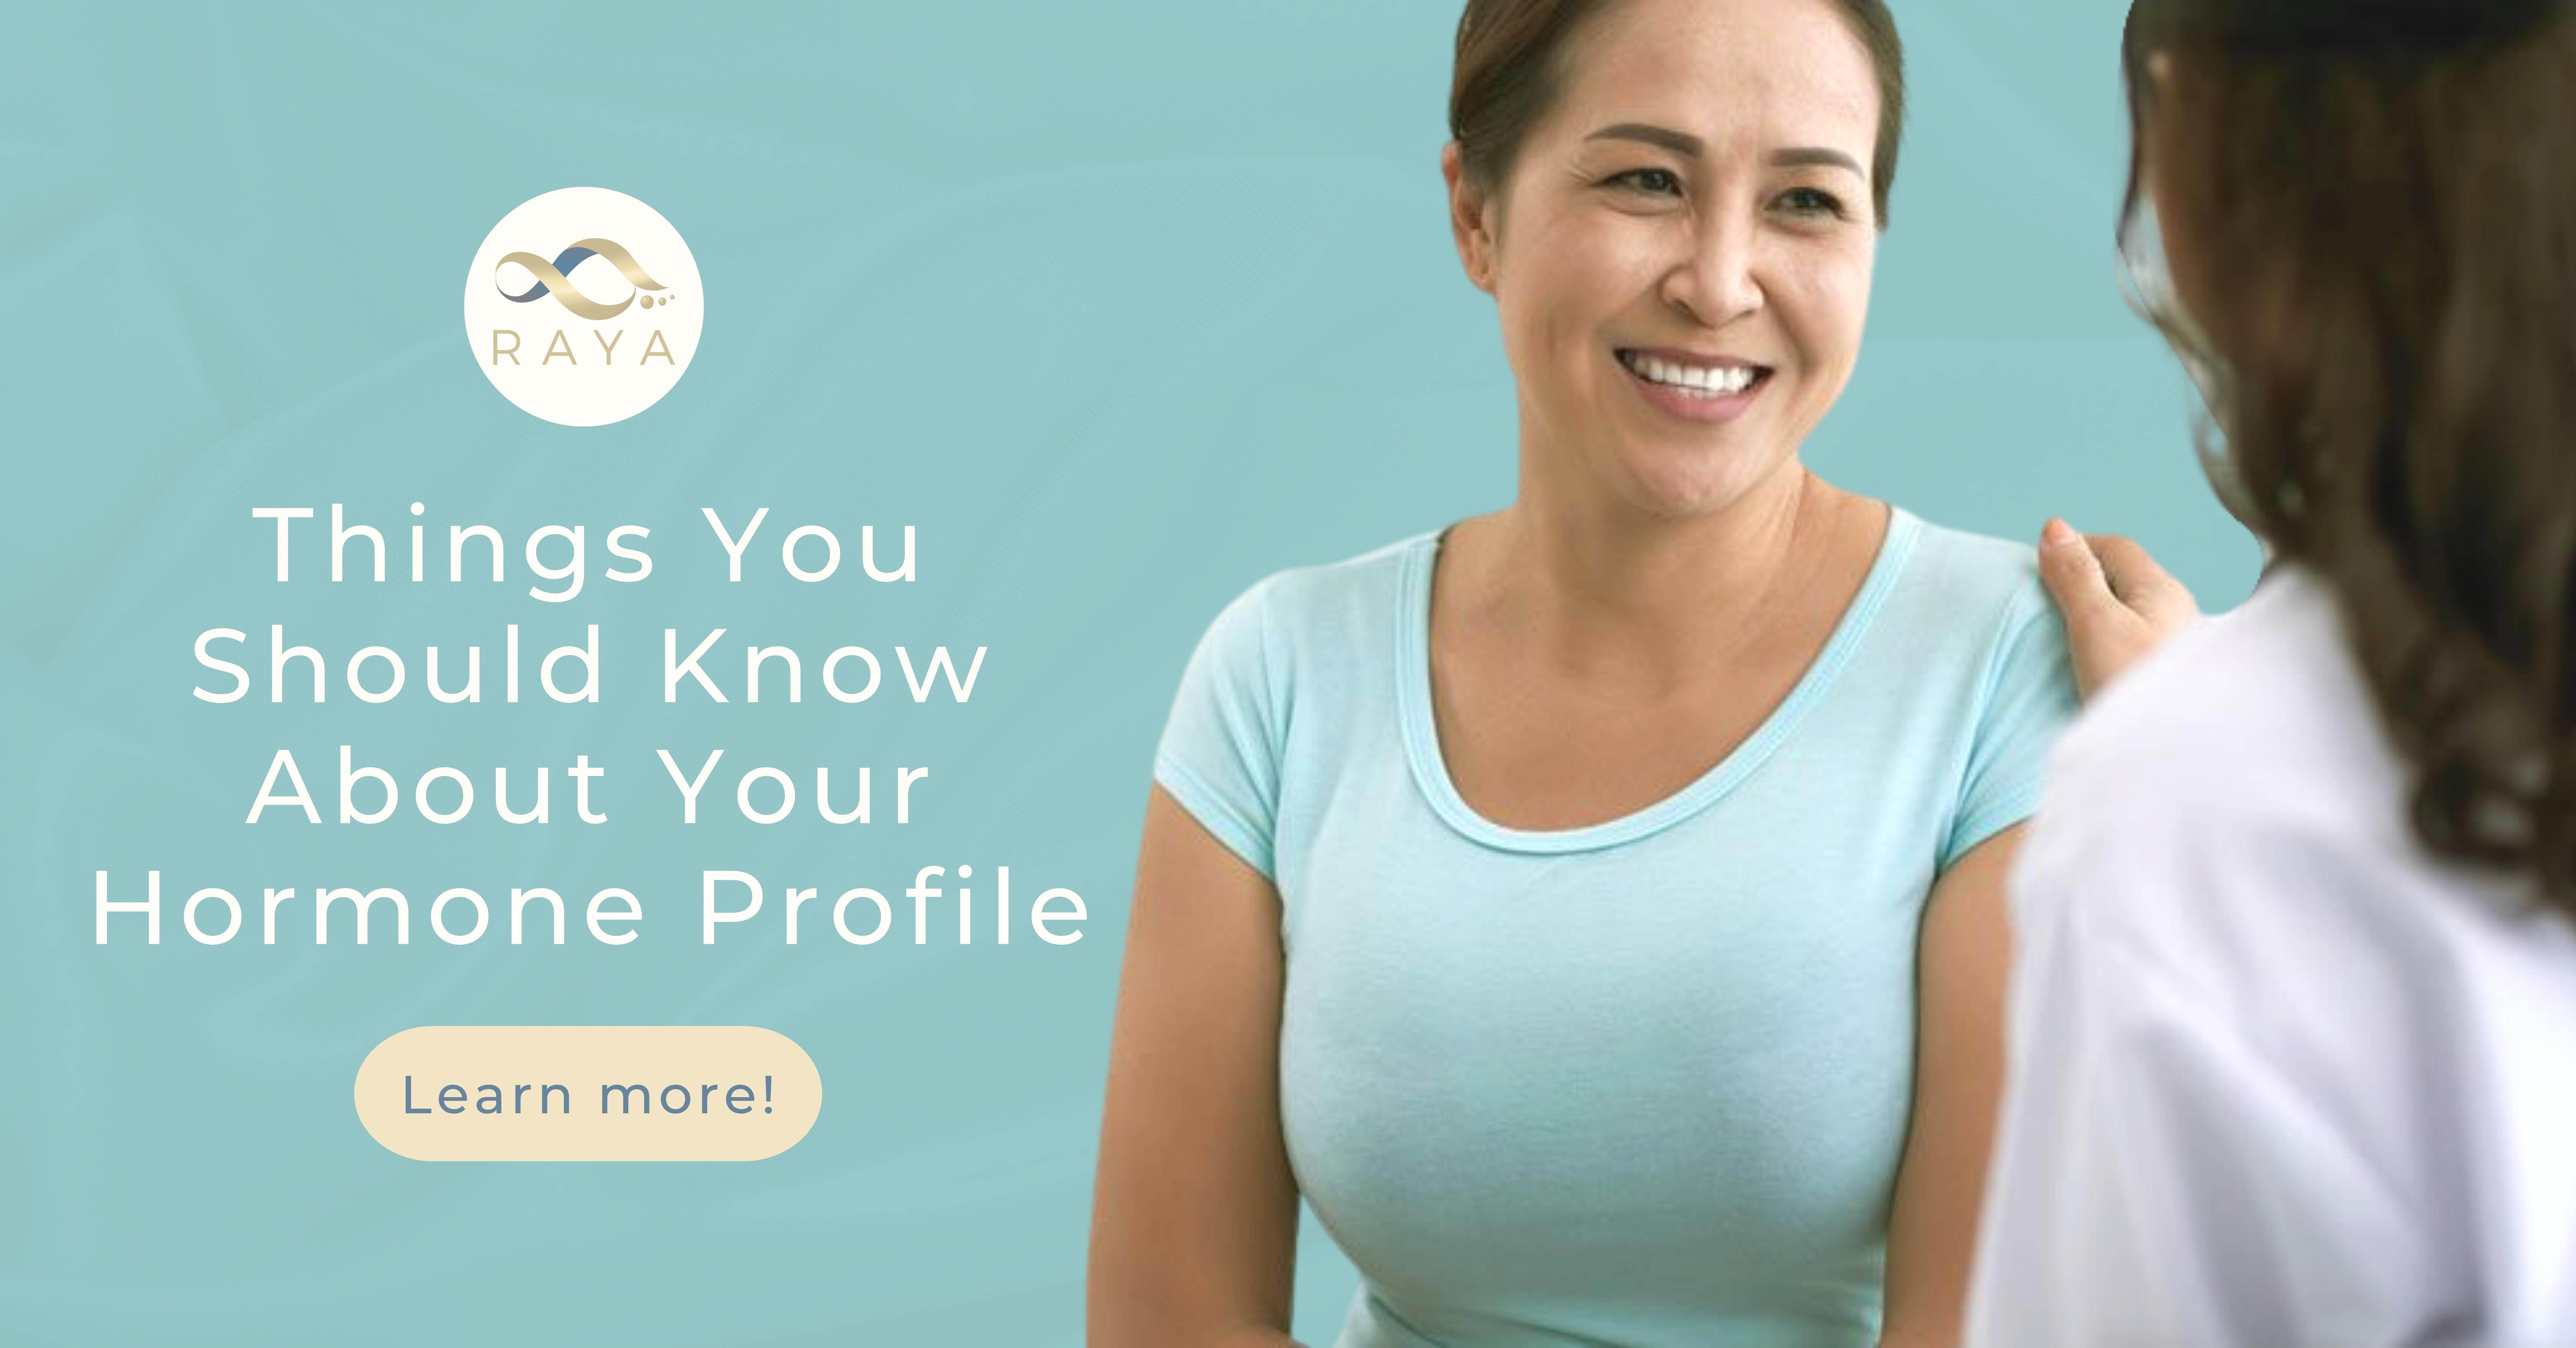 Things You Should Know About Your Hormone Profile